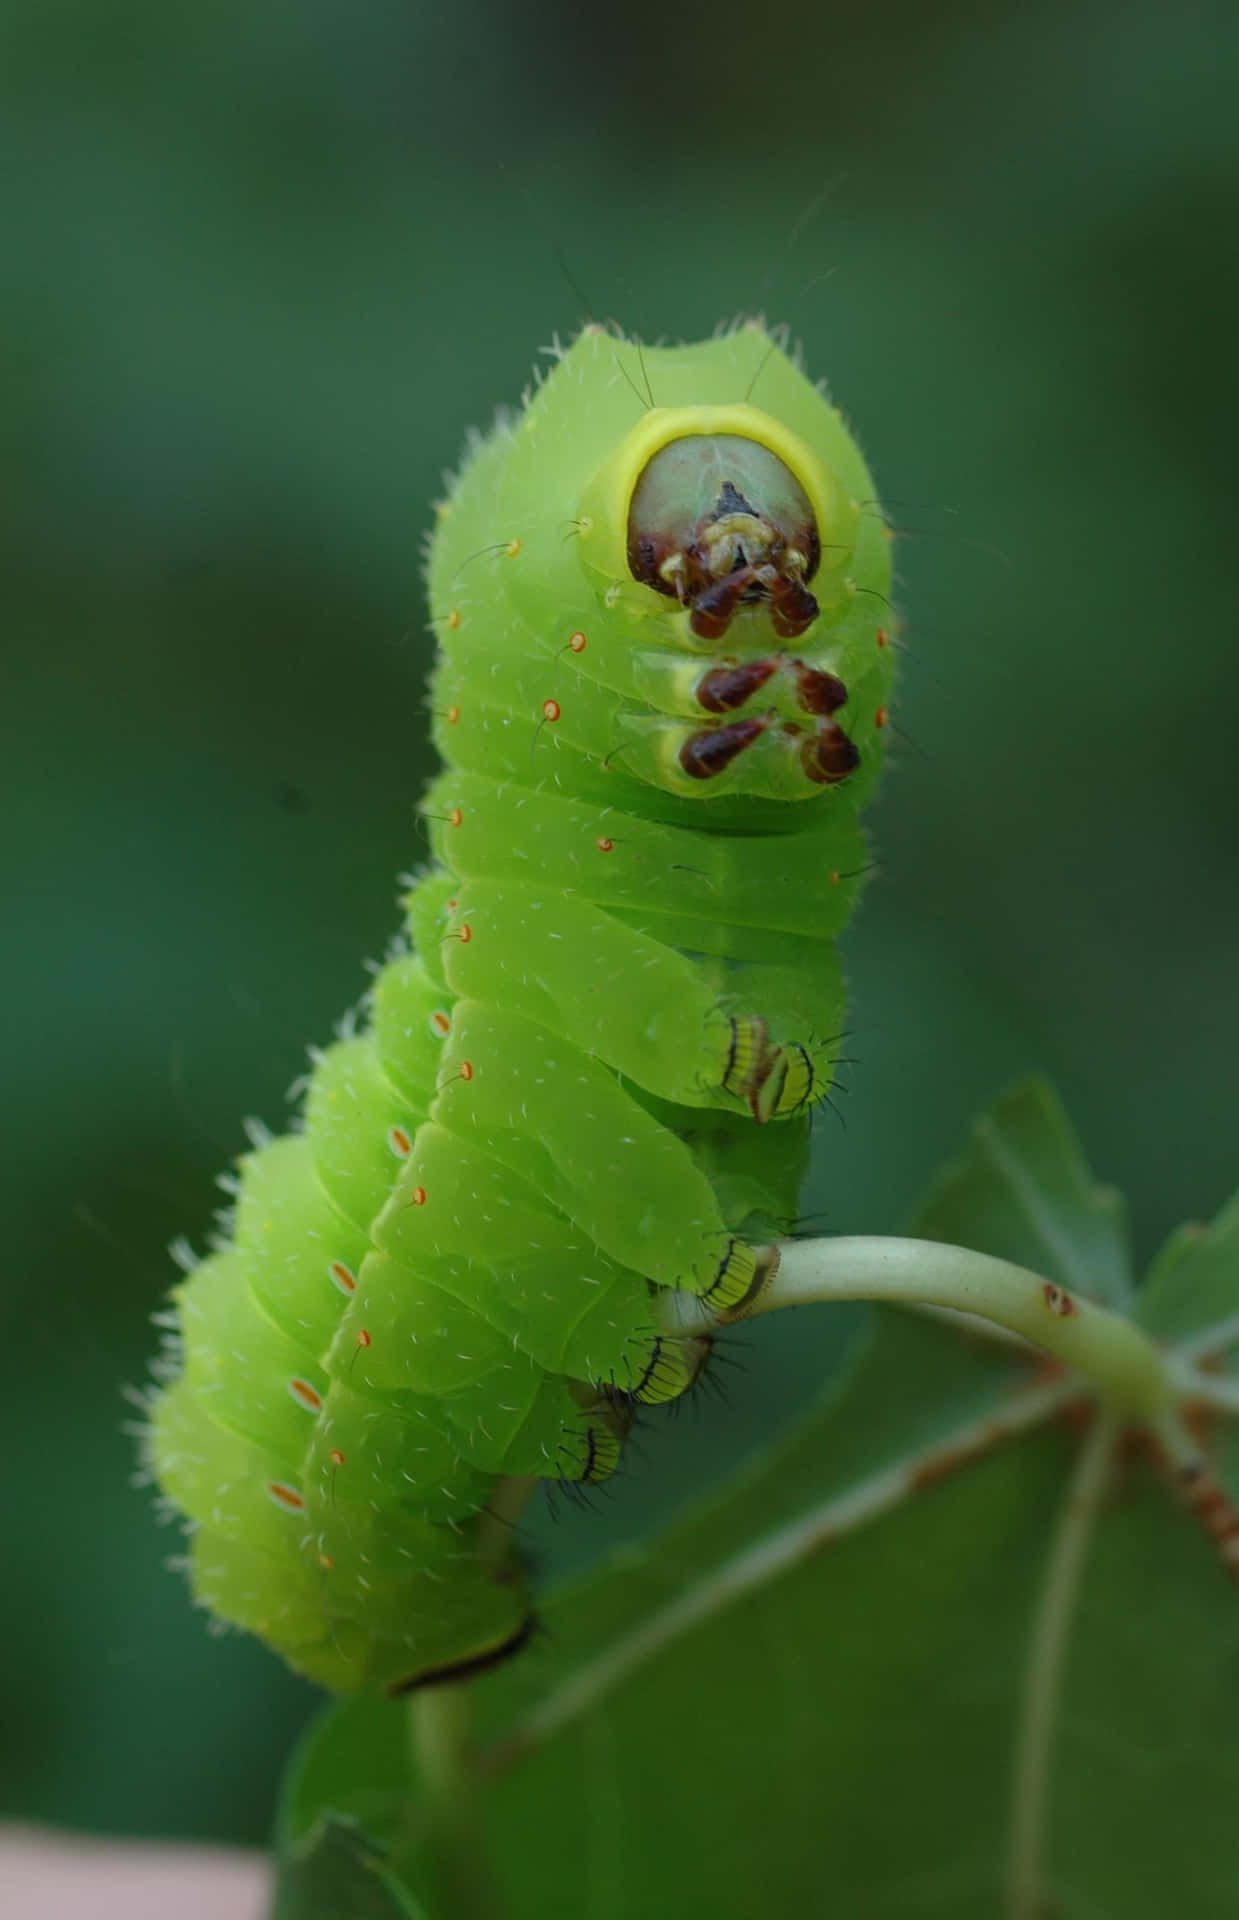 A Green Caterpillar Is Sitting On A Leaf